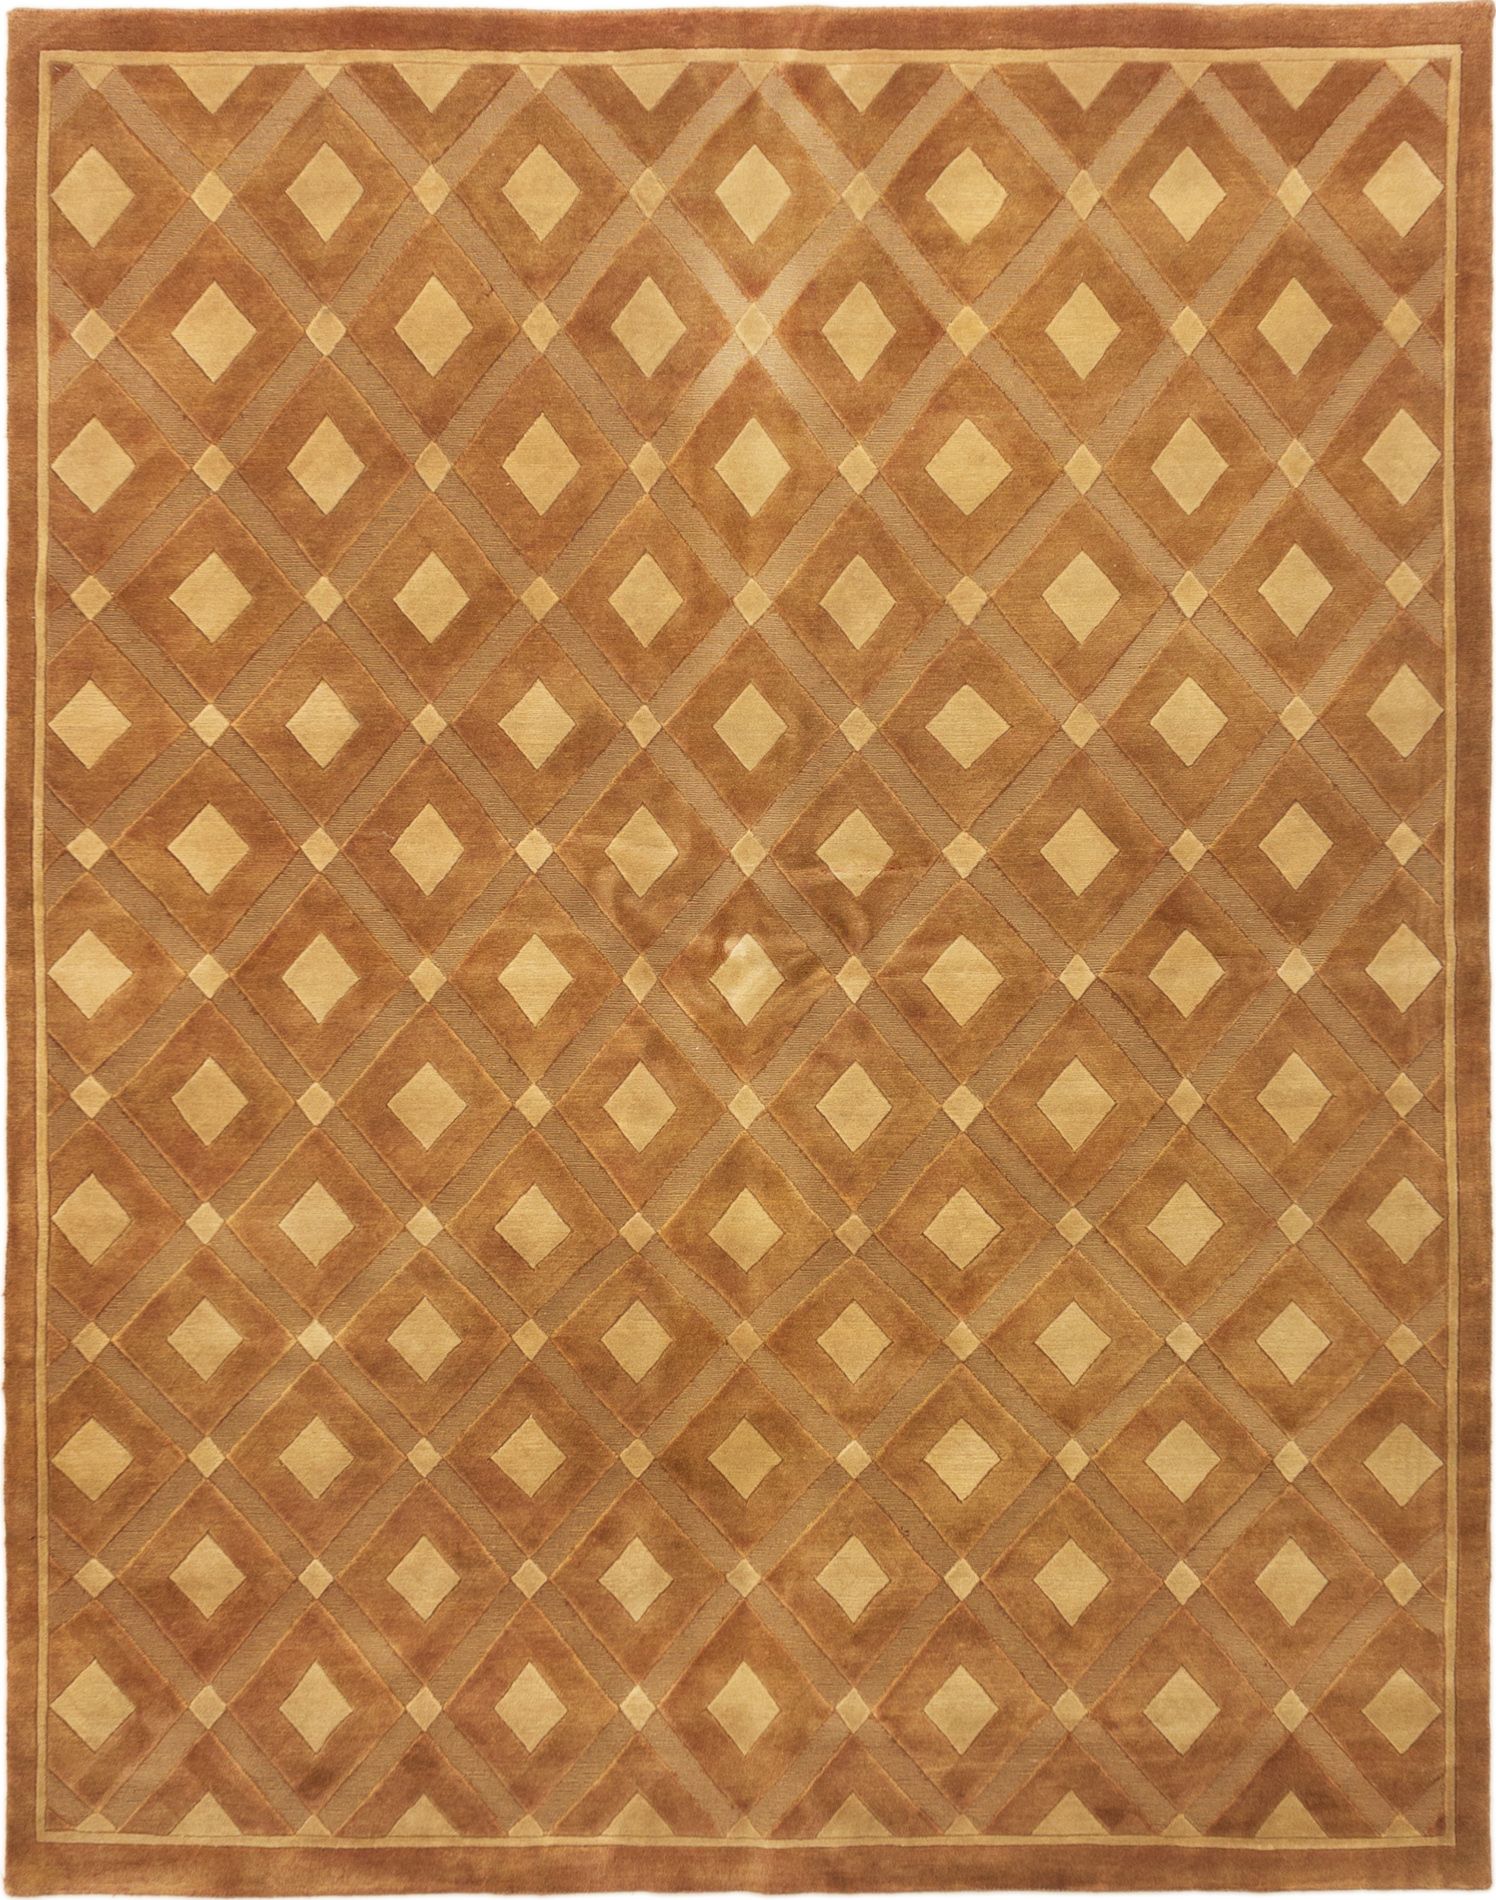 Hand-knotted Luribaft Gabbeh Riz Brown Wool Rug 6'7" x 8'4" Size: 6'7" x 8'4"  